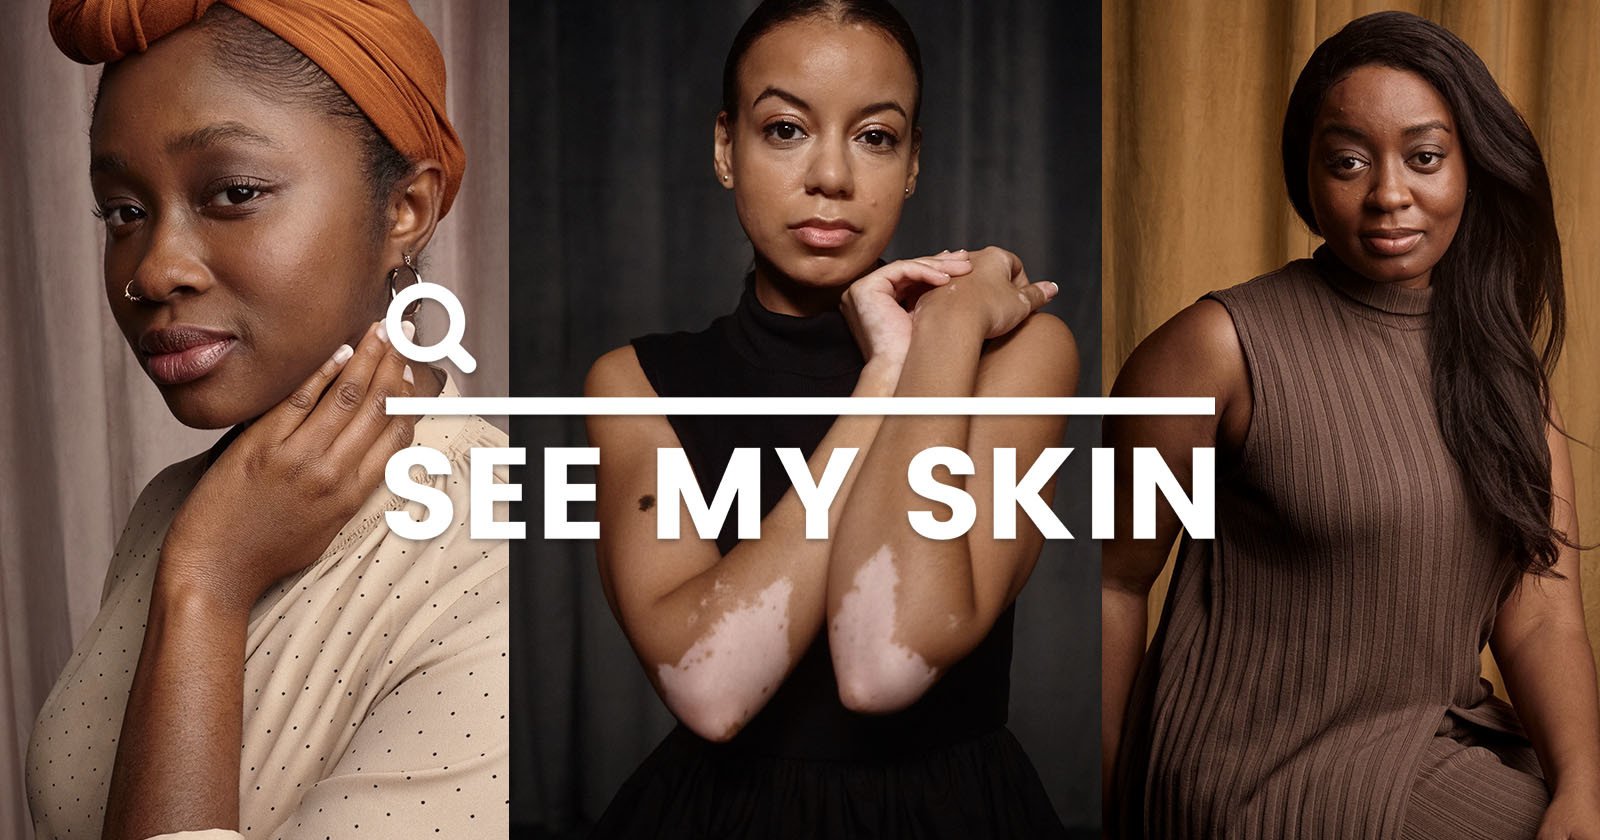 New Initiative Aims to Change the Lack of Diversity in Skincare Imagery